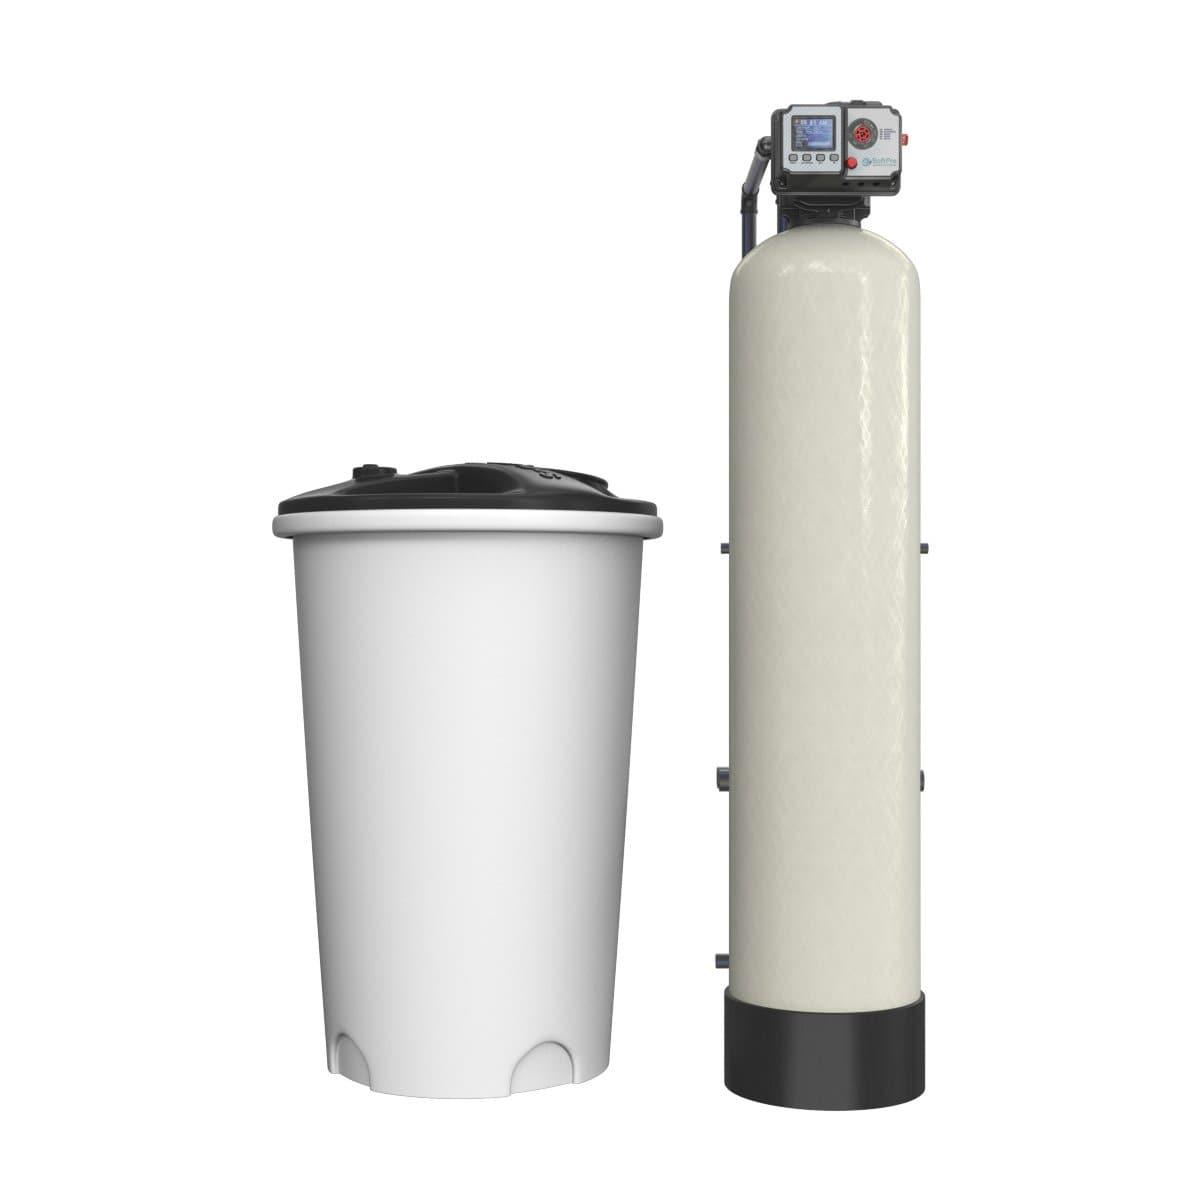 Can a Water Softener Save Your Water Heater? - c and j water